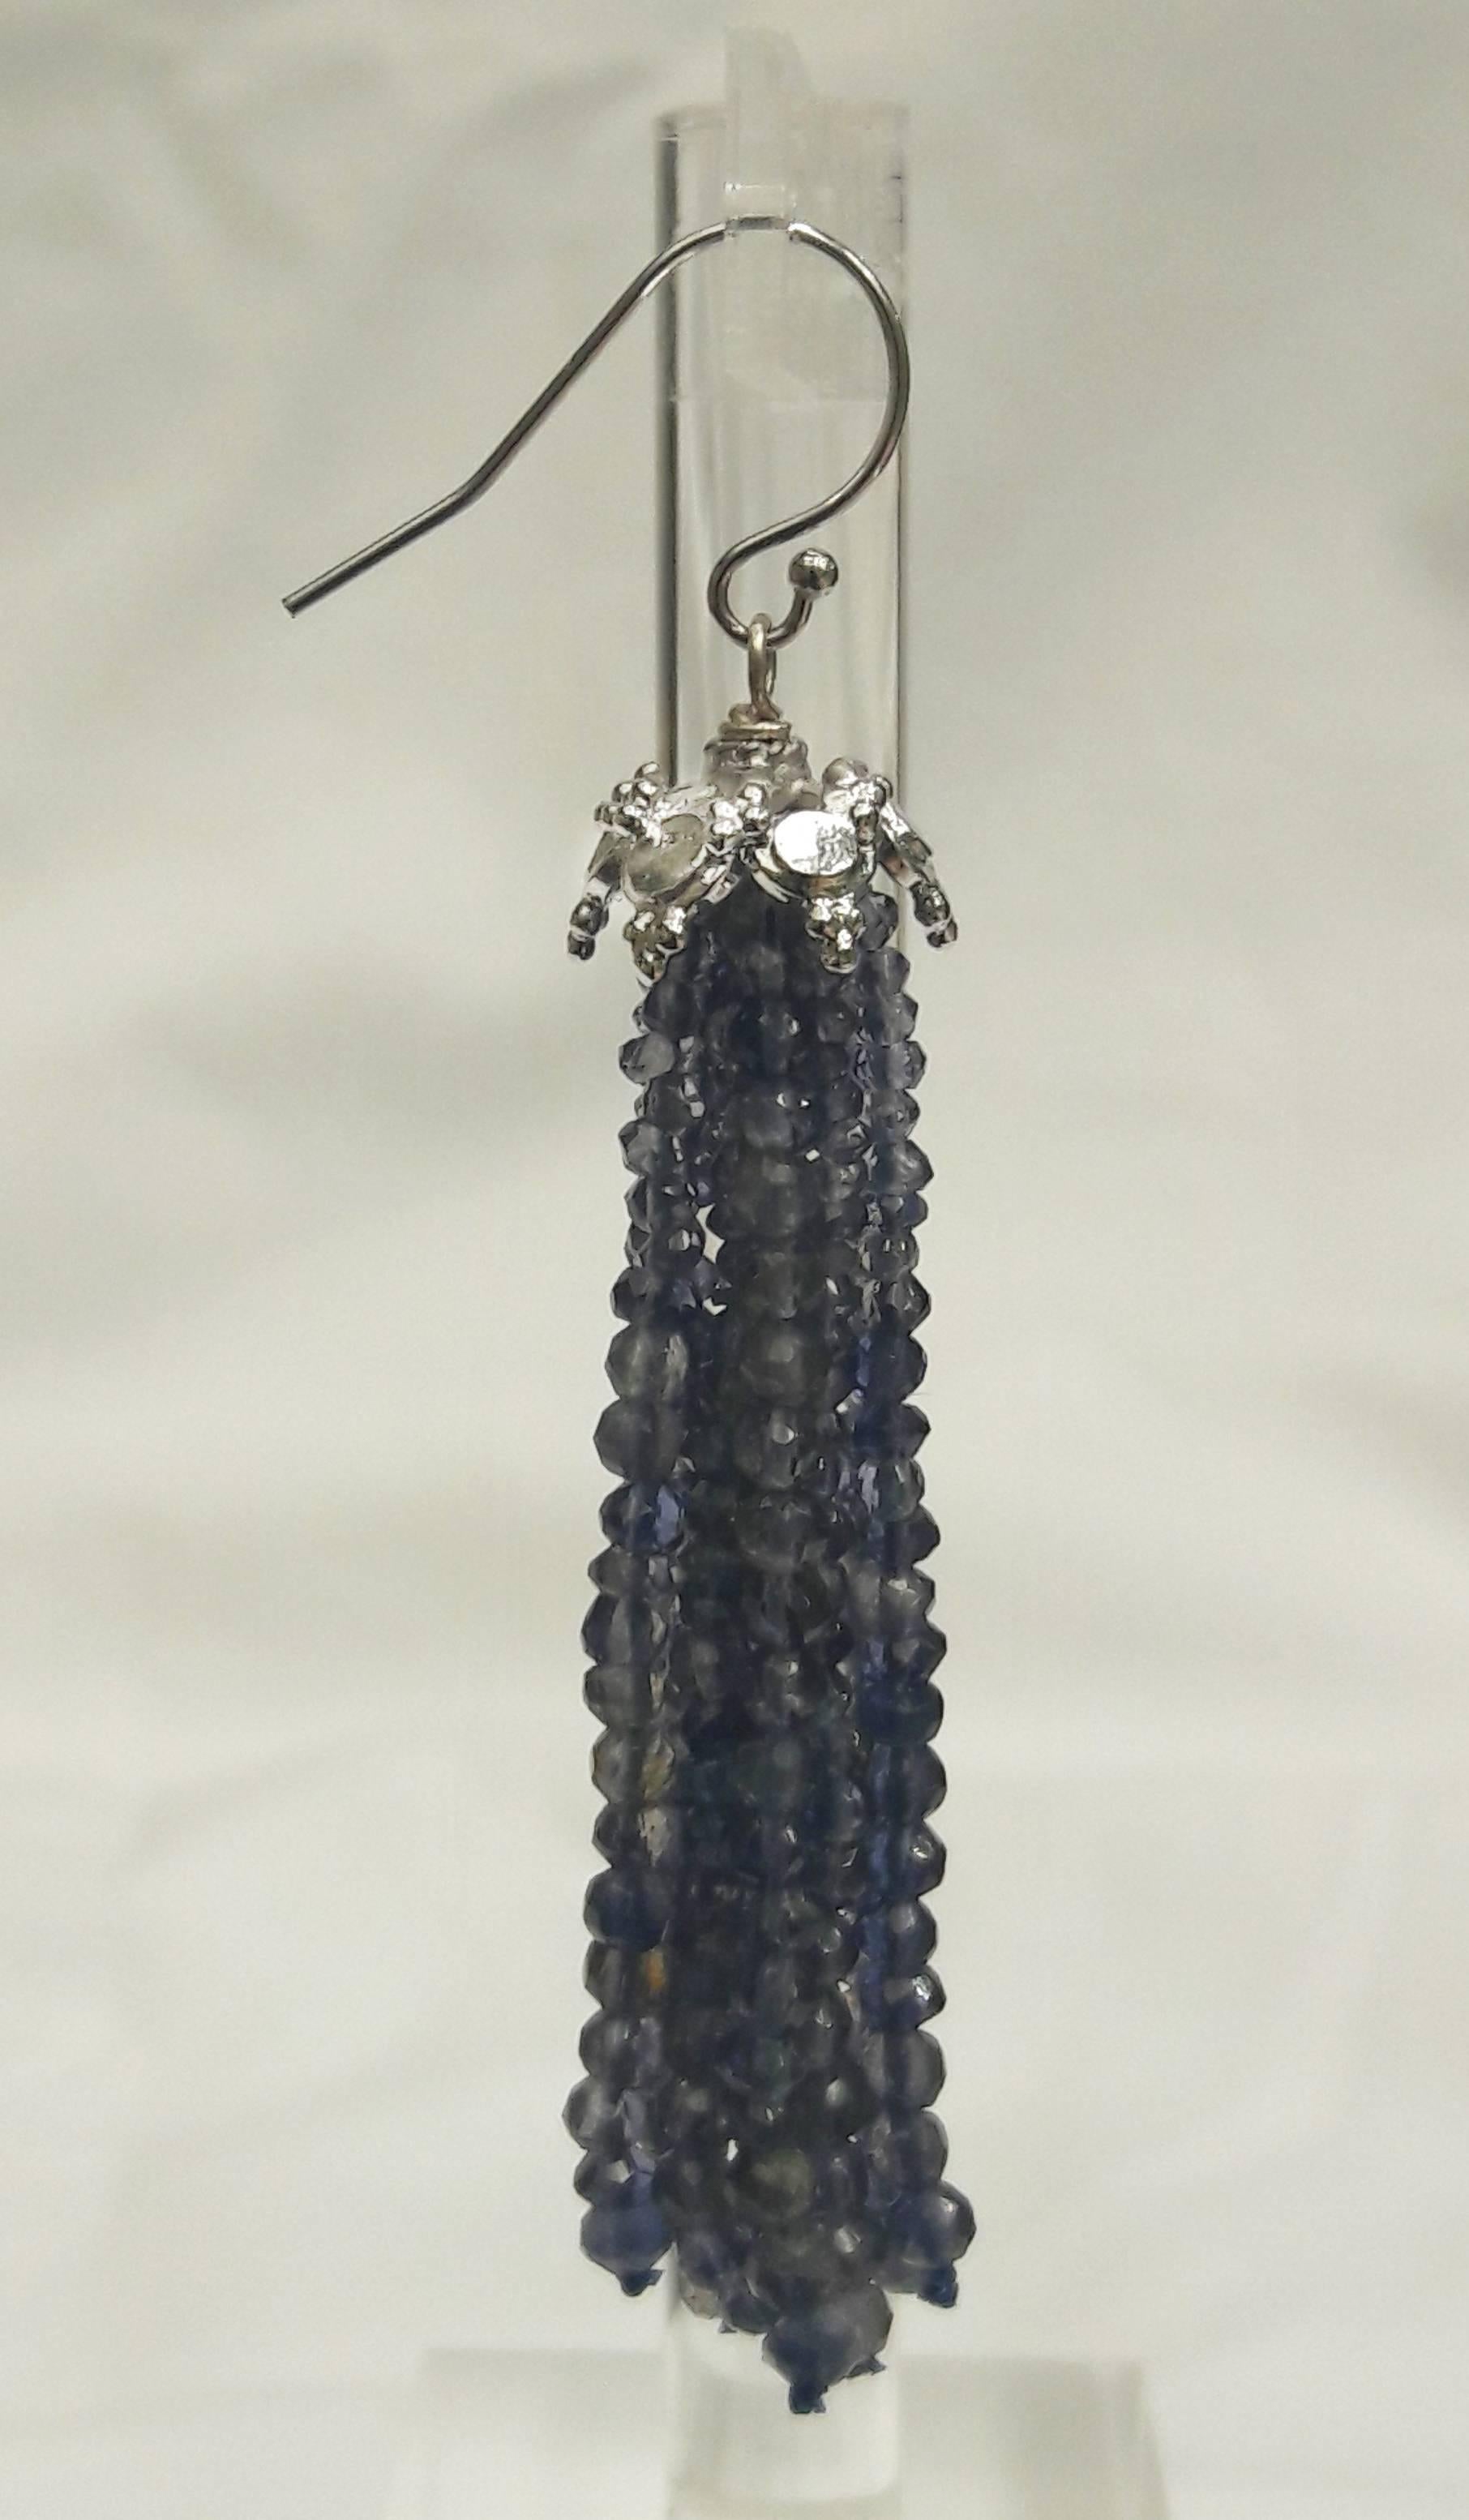 The many tones of blue faceted iolite beads have a translucent glow that is highlighted by the rhodium plated 14k white gold designed cup, and completed with a 14k white gold hook. These earrings are whimsical and beautifully play with light as the